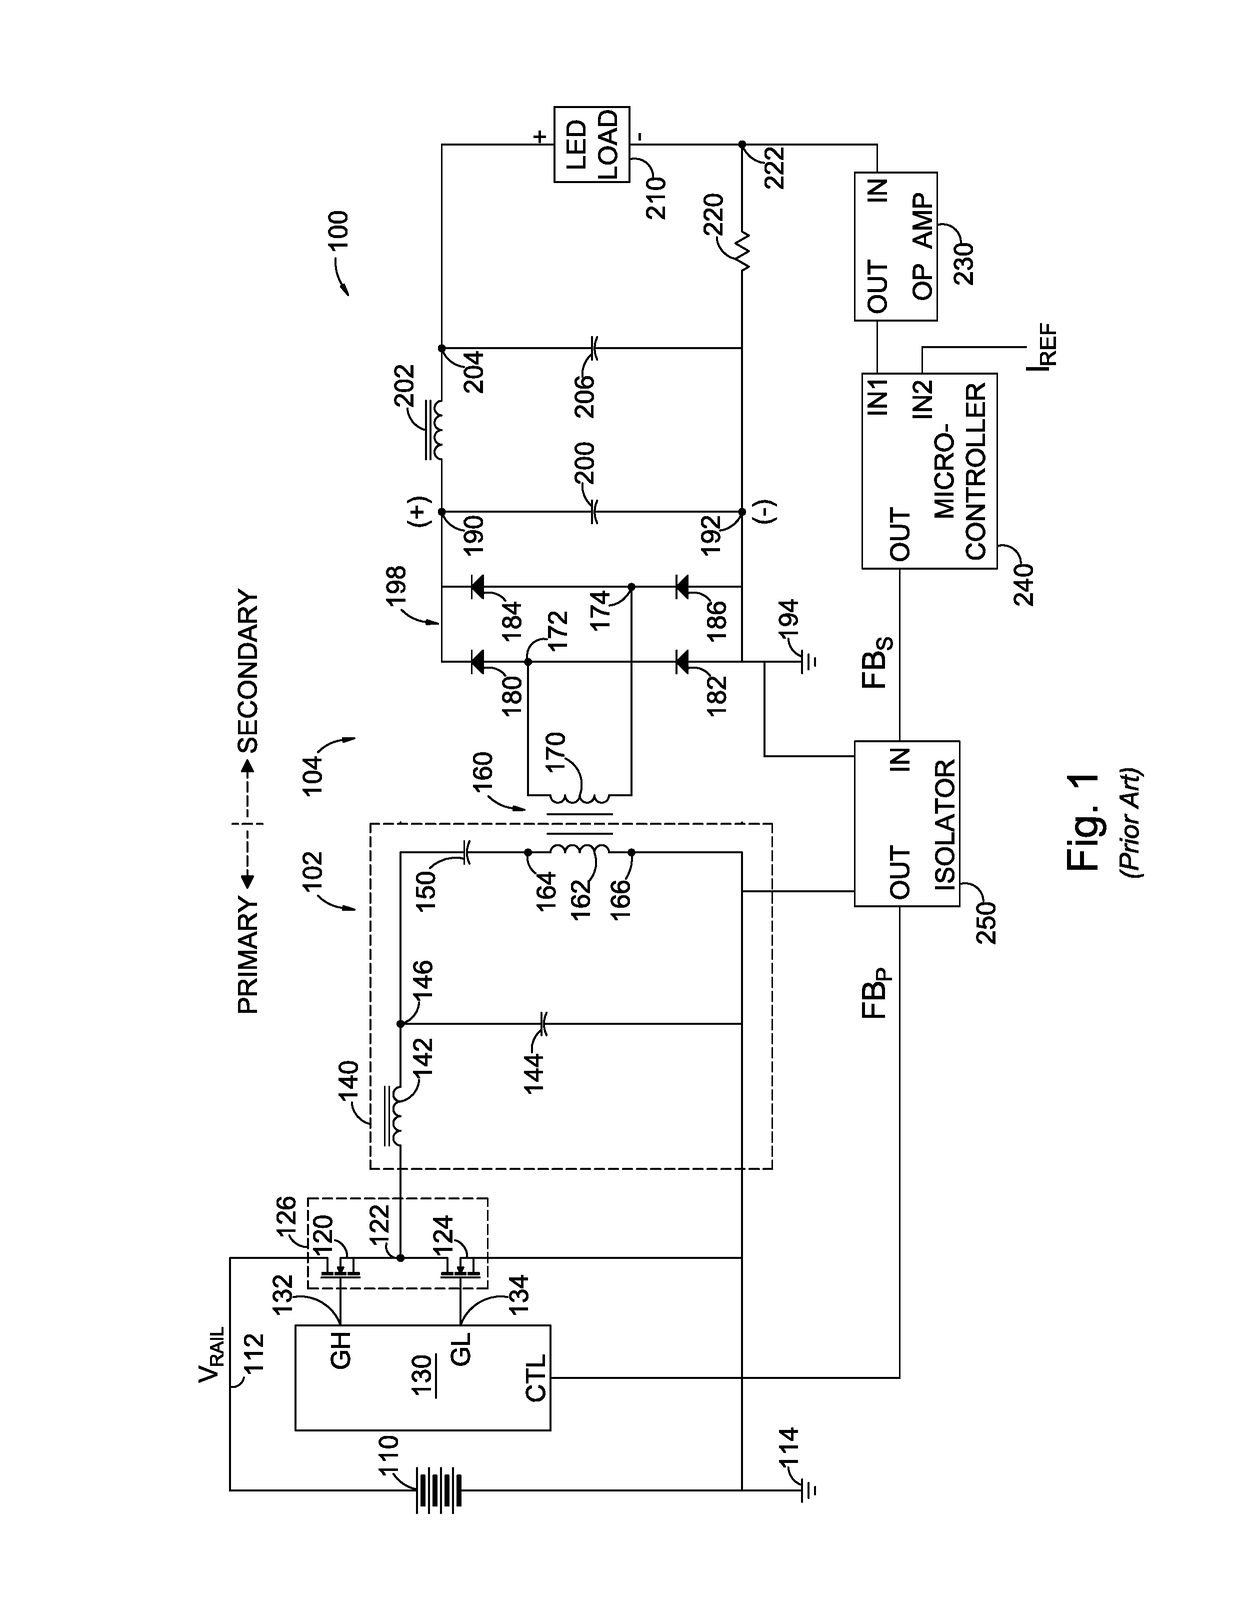 Primary current sensing method for isolated LED driver